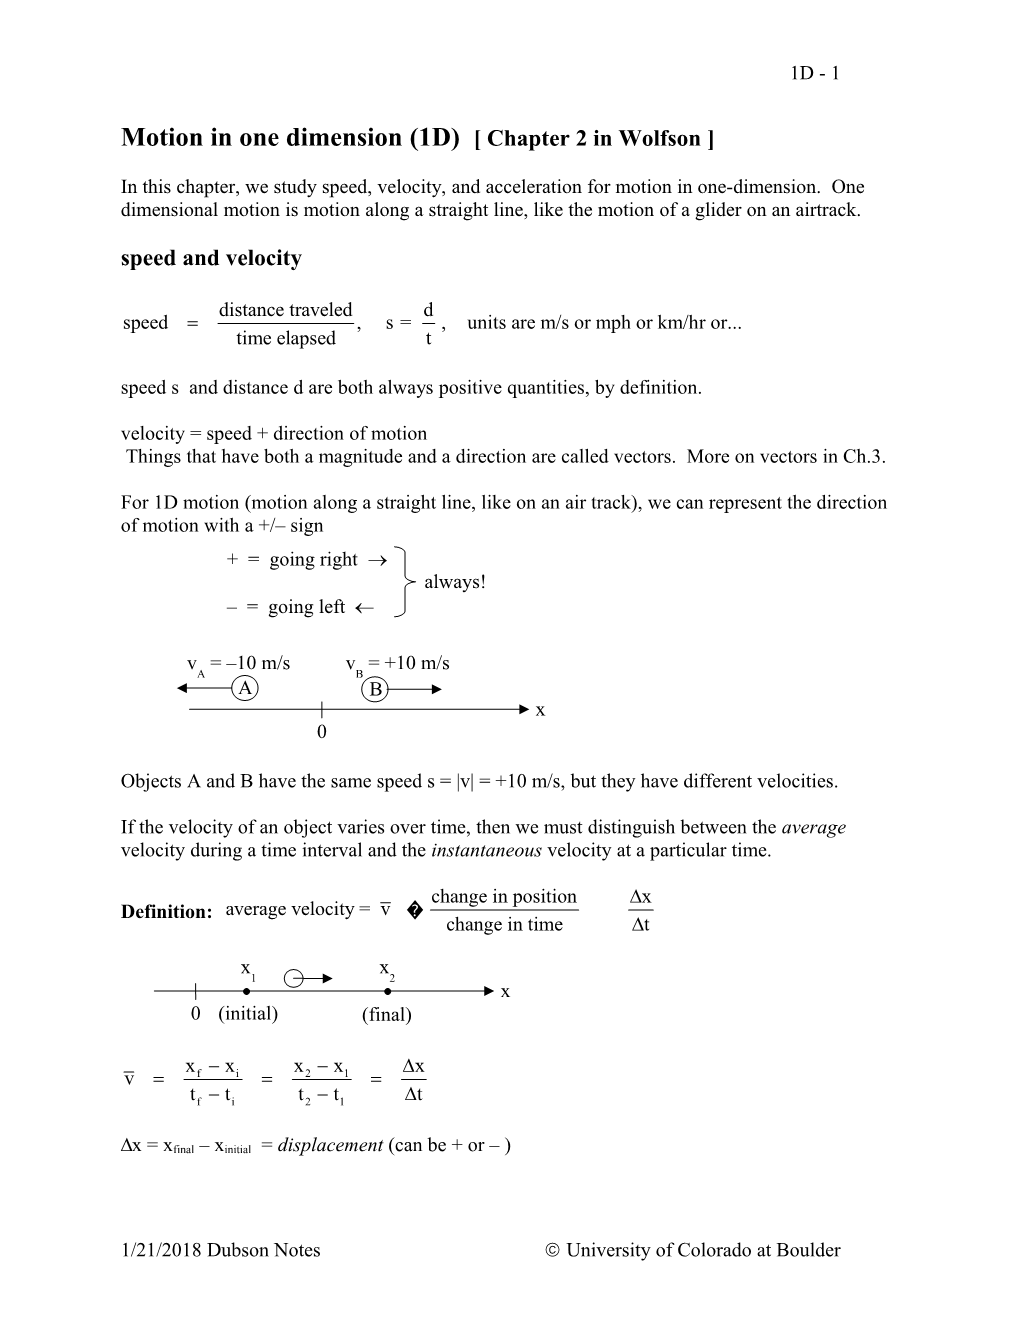 Motion in One Dimension (1D) Chapter 2 in Wolfson